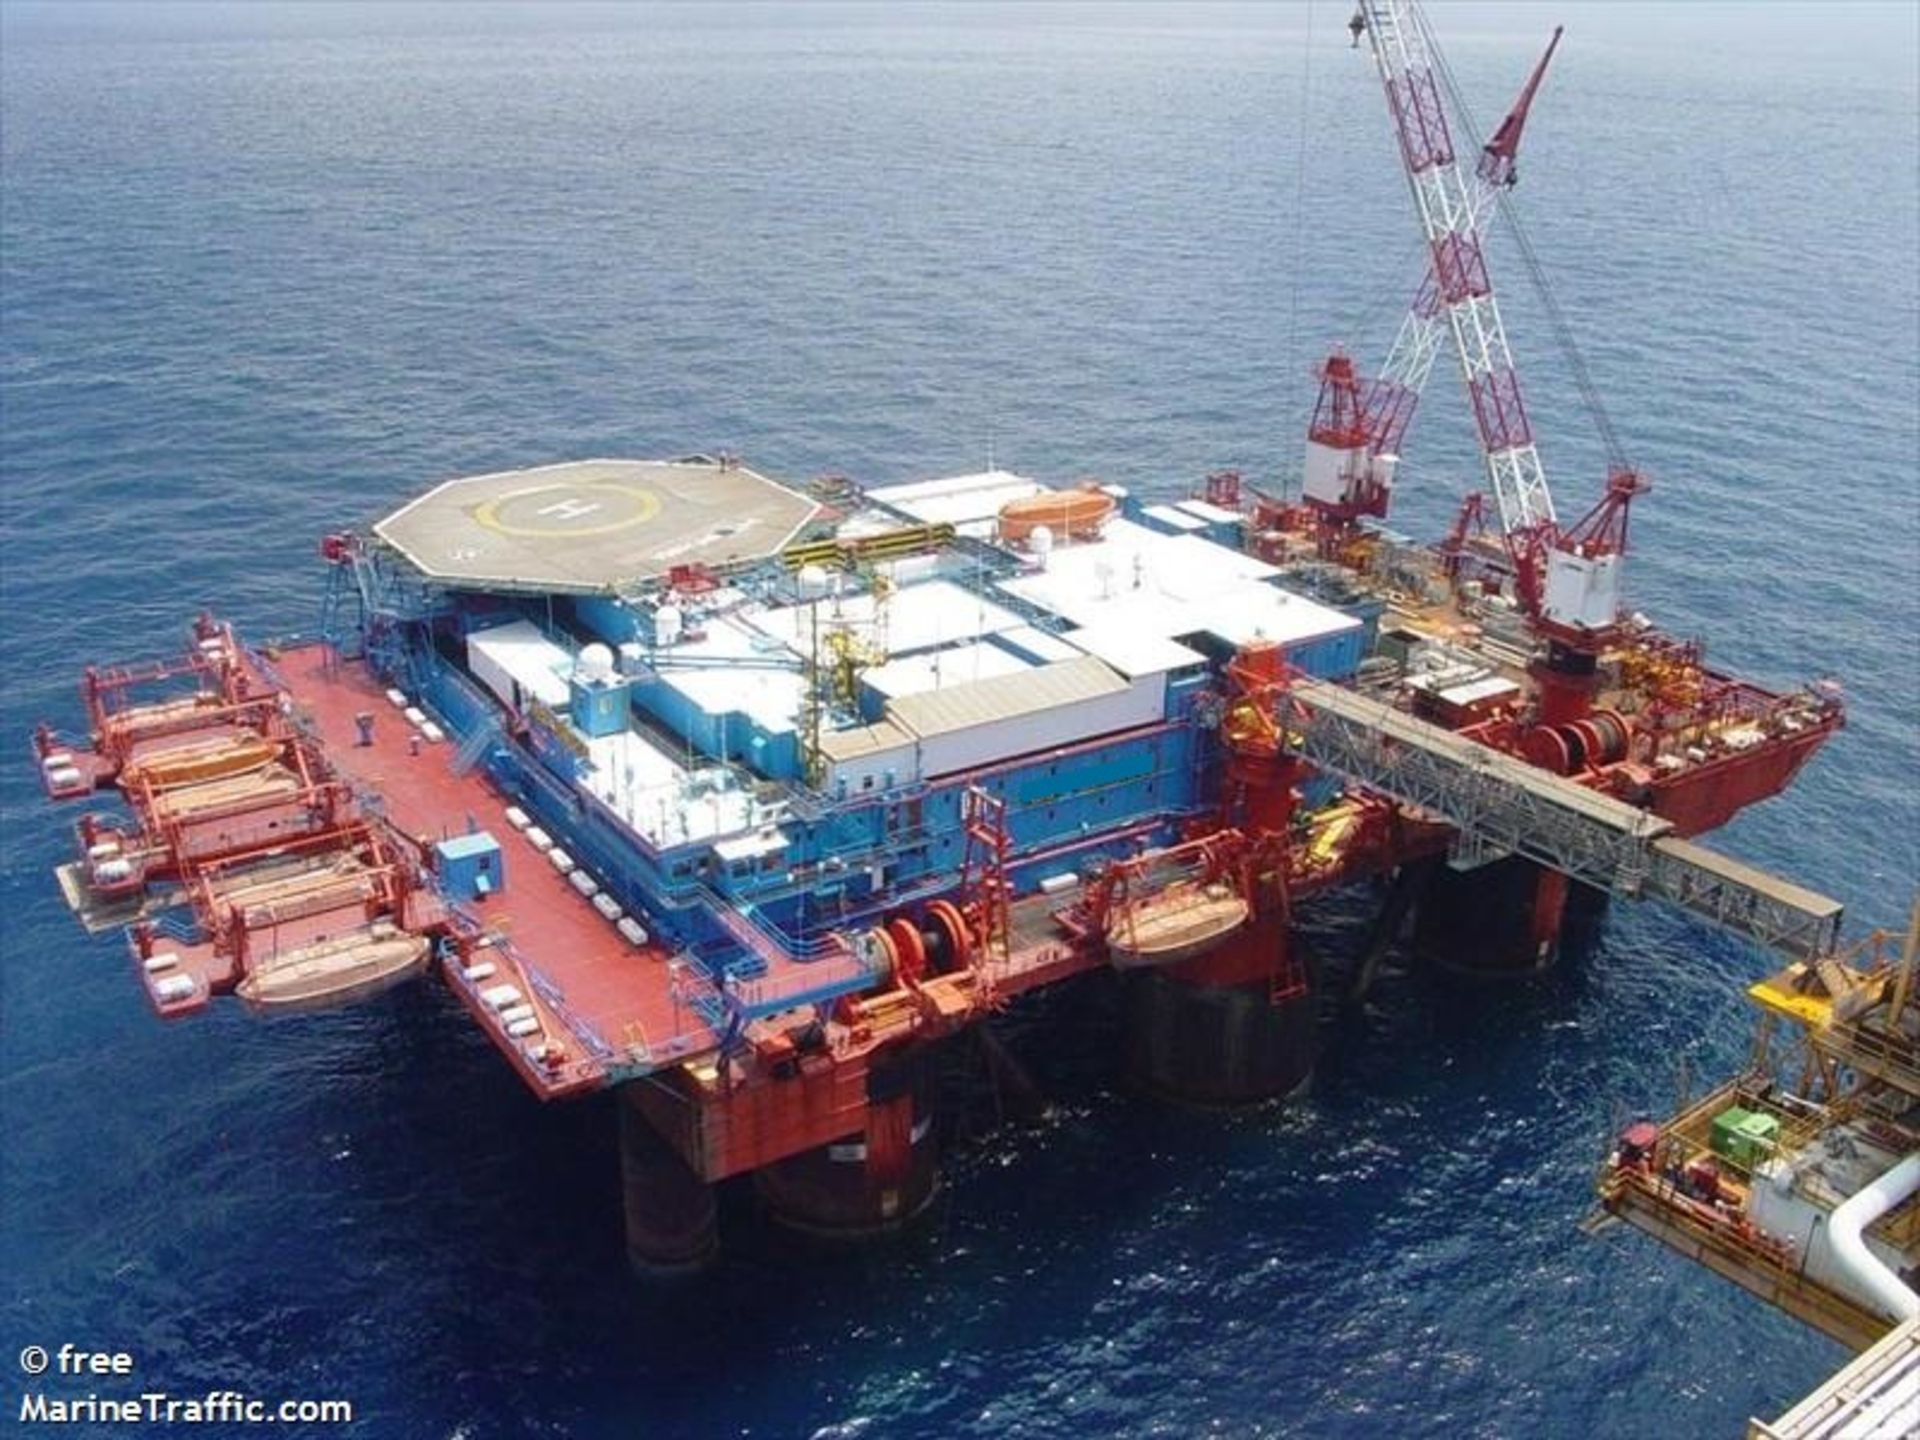 View videos of the assets of the 812 Semi Submersible Accommodation Vessel - Click Here